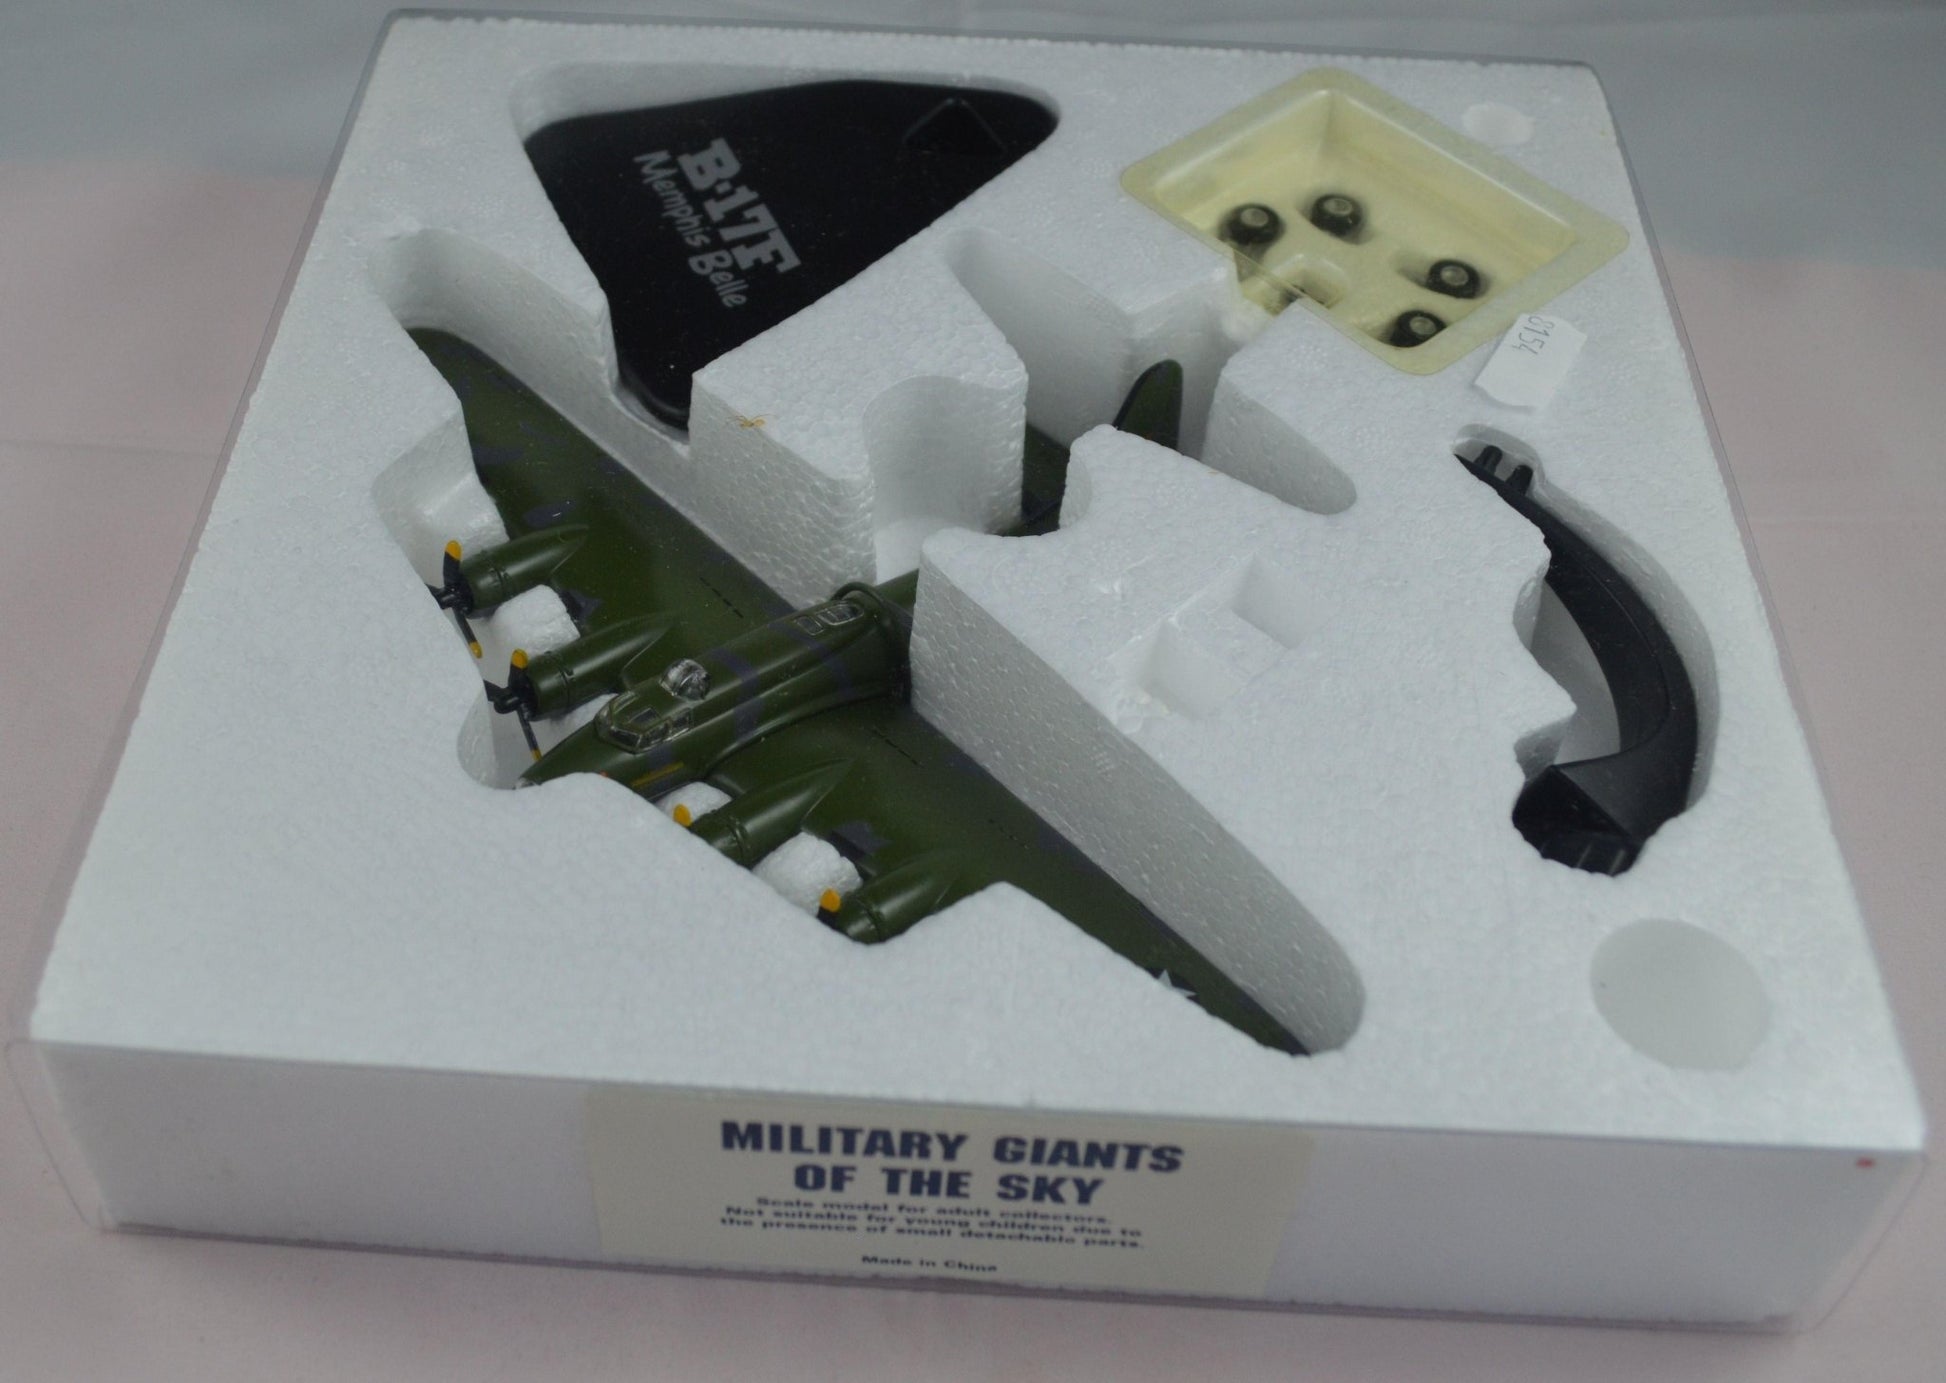 MODEL PLANE ATLAS EDITIONS MEMPHIS BELLE BOXED & SEALED MEMPHIS BELLE VIDEO(PREVIOUSLY OWNED)VERY GOOD CONDITION - TMD167207